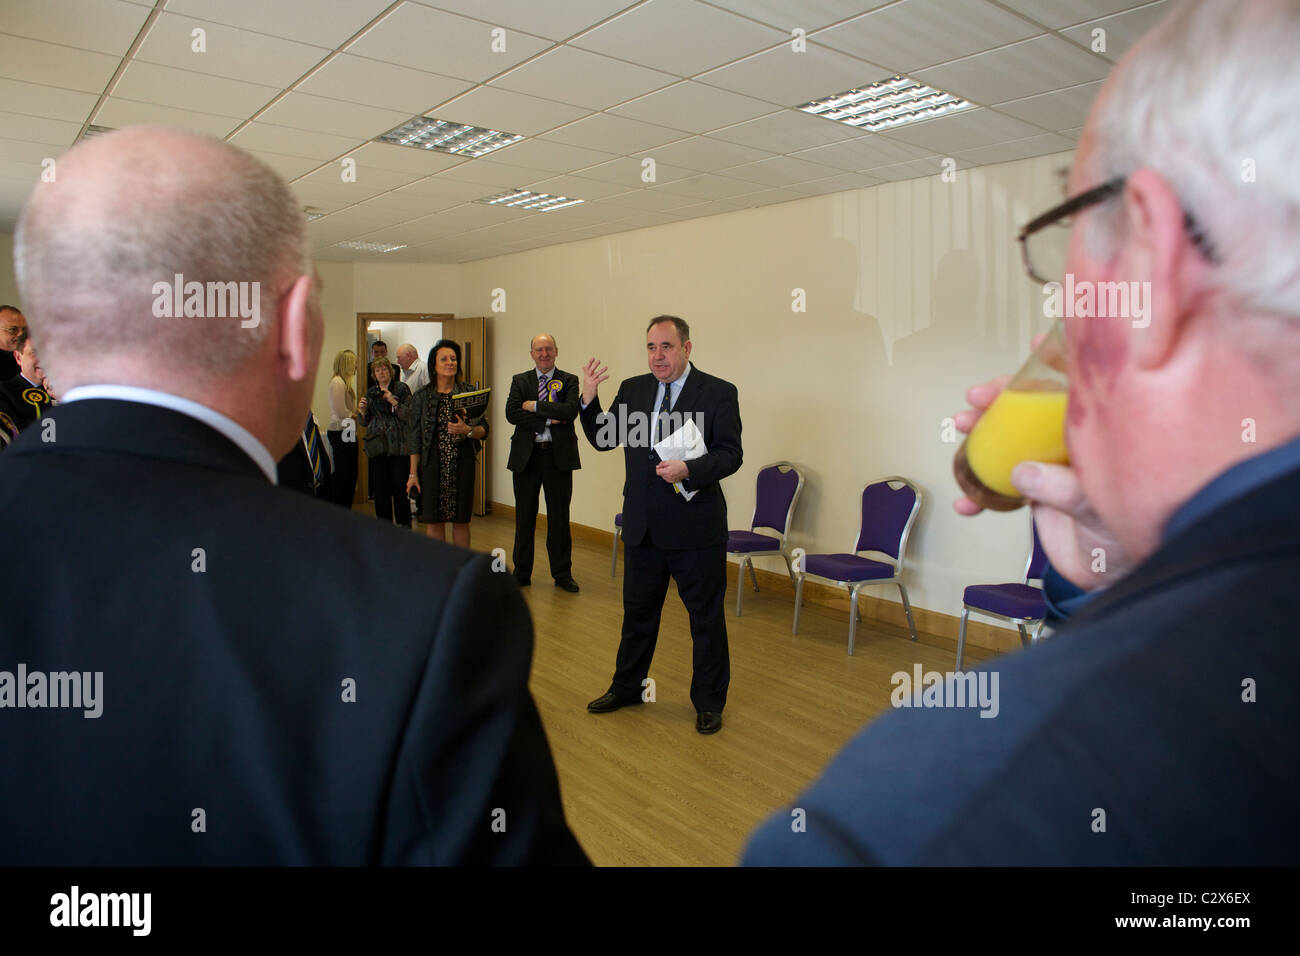 Alex Salmond, leader of the Scottish National Party (SNP) meeting business people Stock Photo